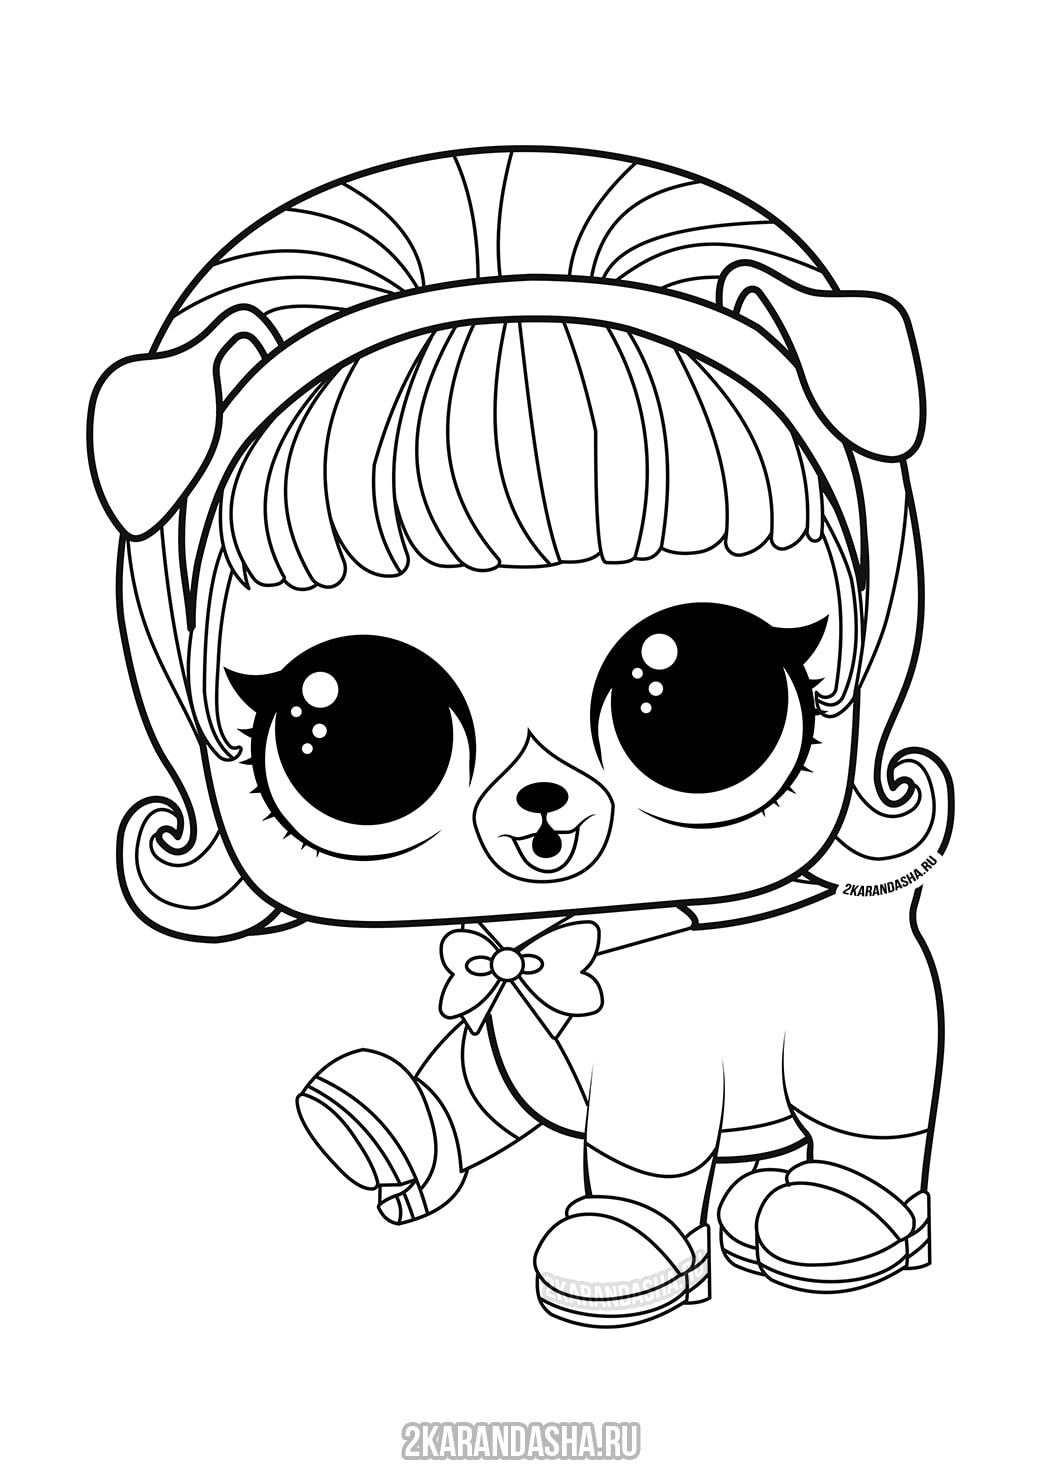 Coloring Page Lol Pets : 9cm1svnztgjxam / You can download or print ...